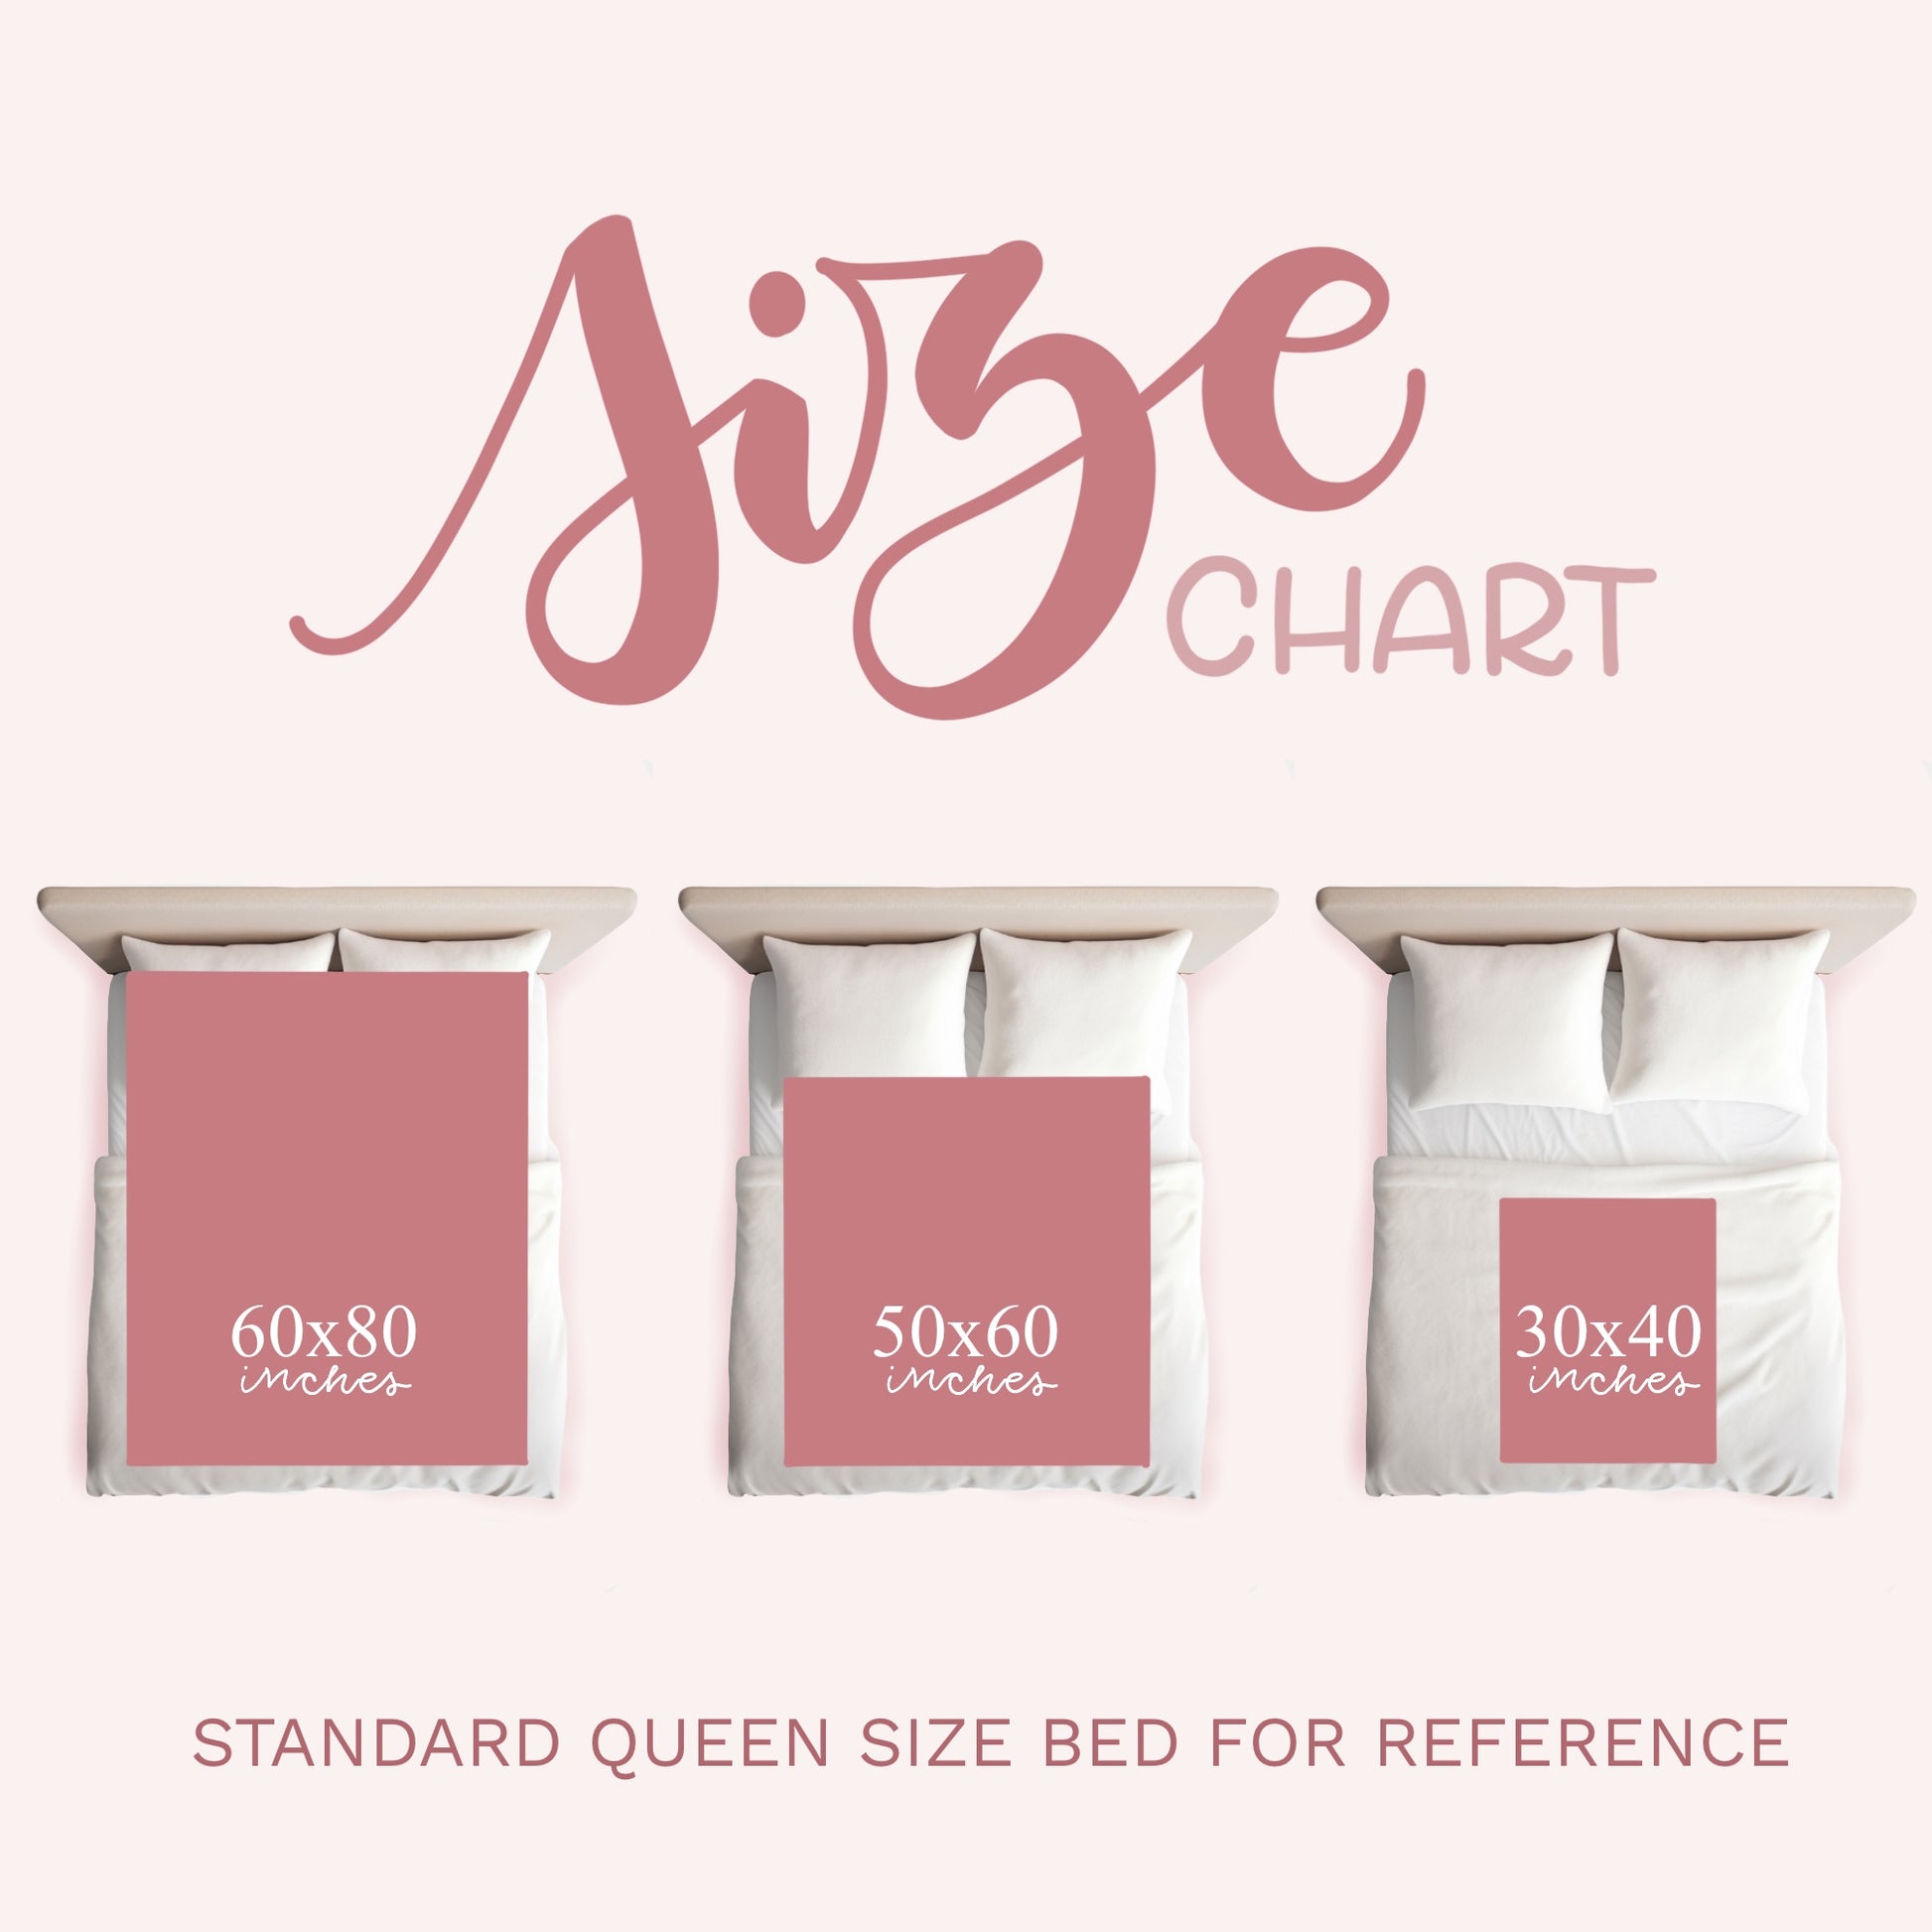 the size chart for the standard queen size bed for reference